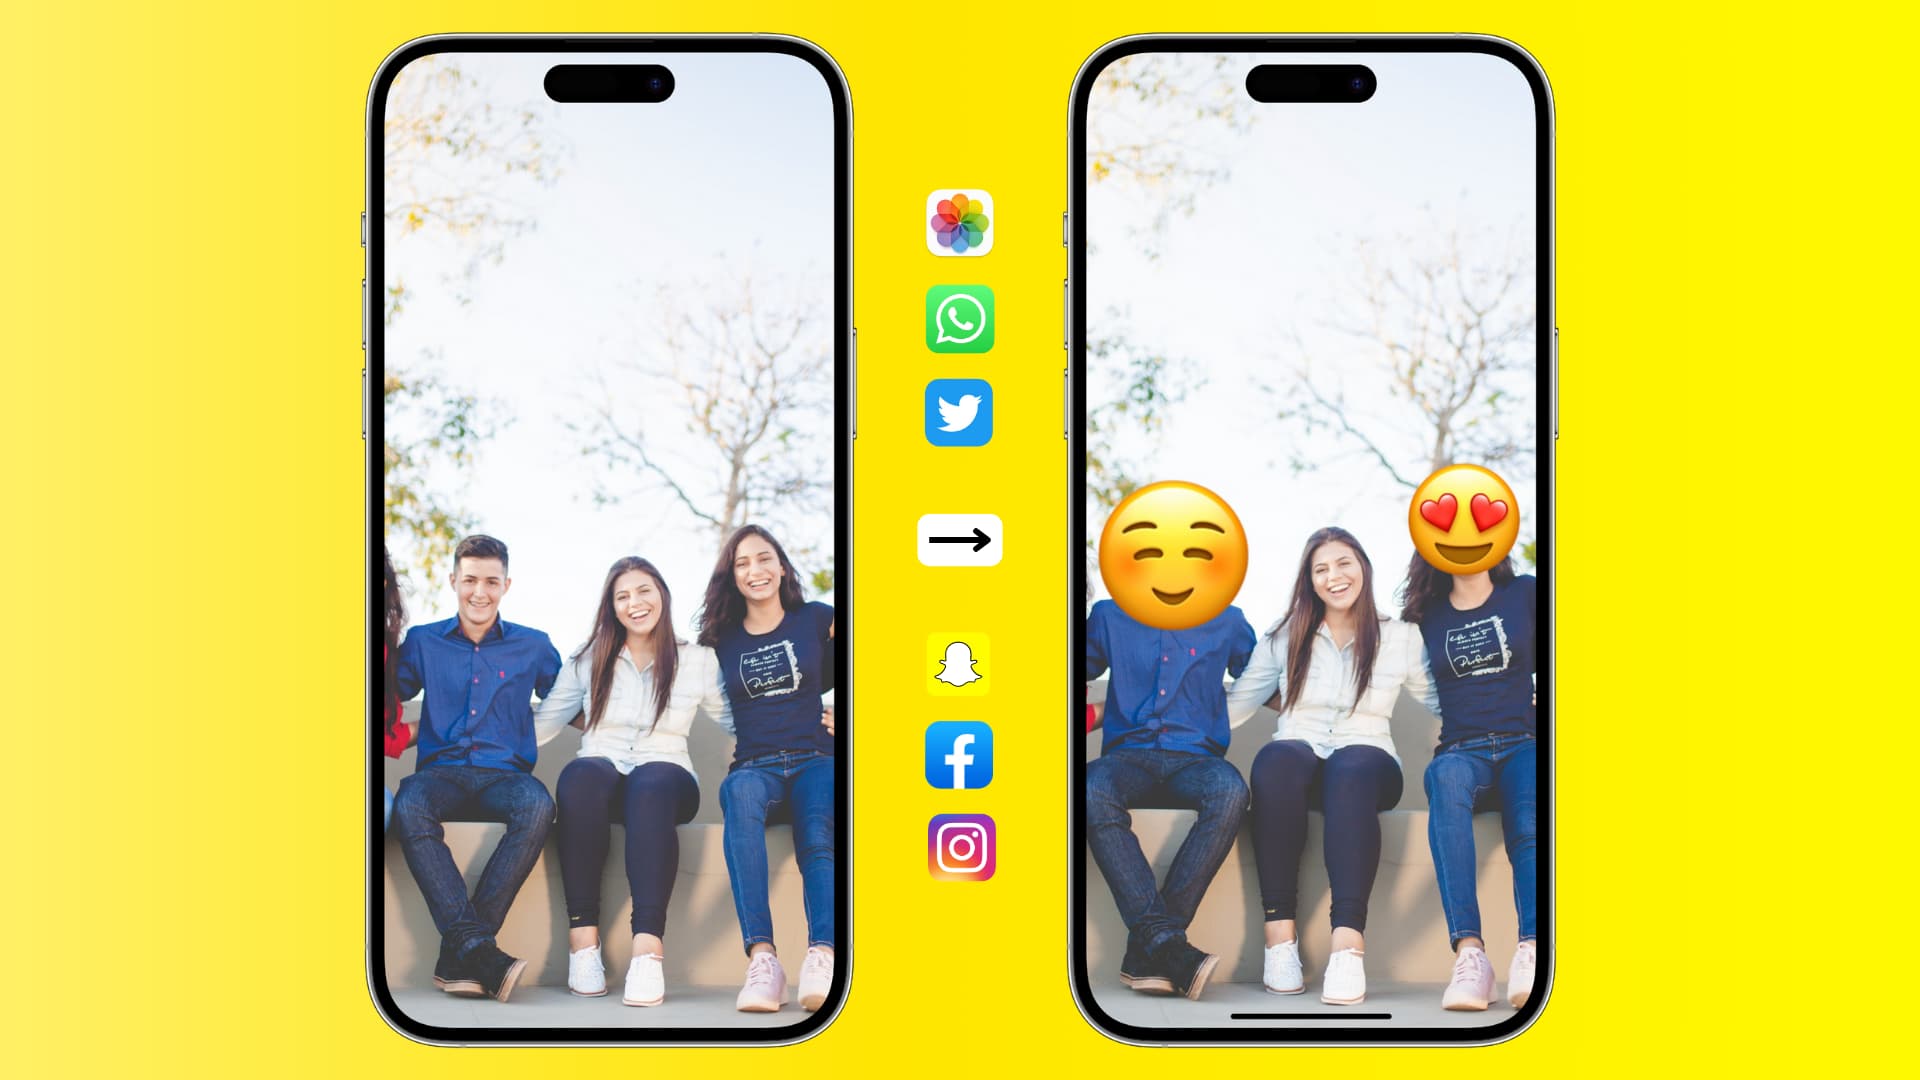 iPhone mockups showing emojis over faces of two people in a group photo